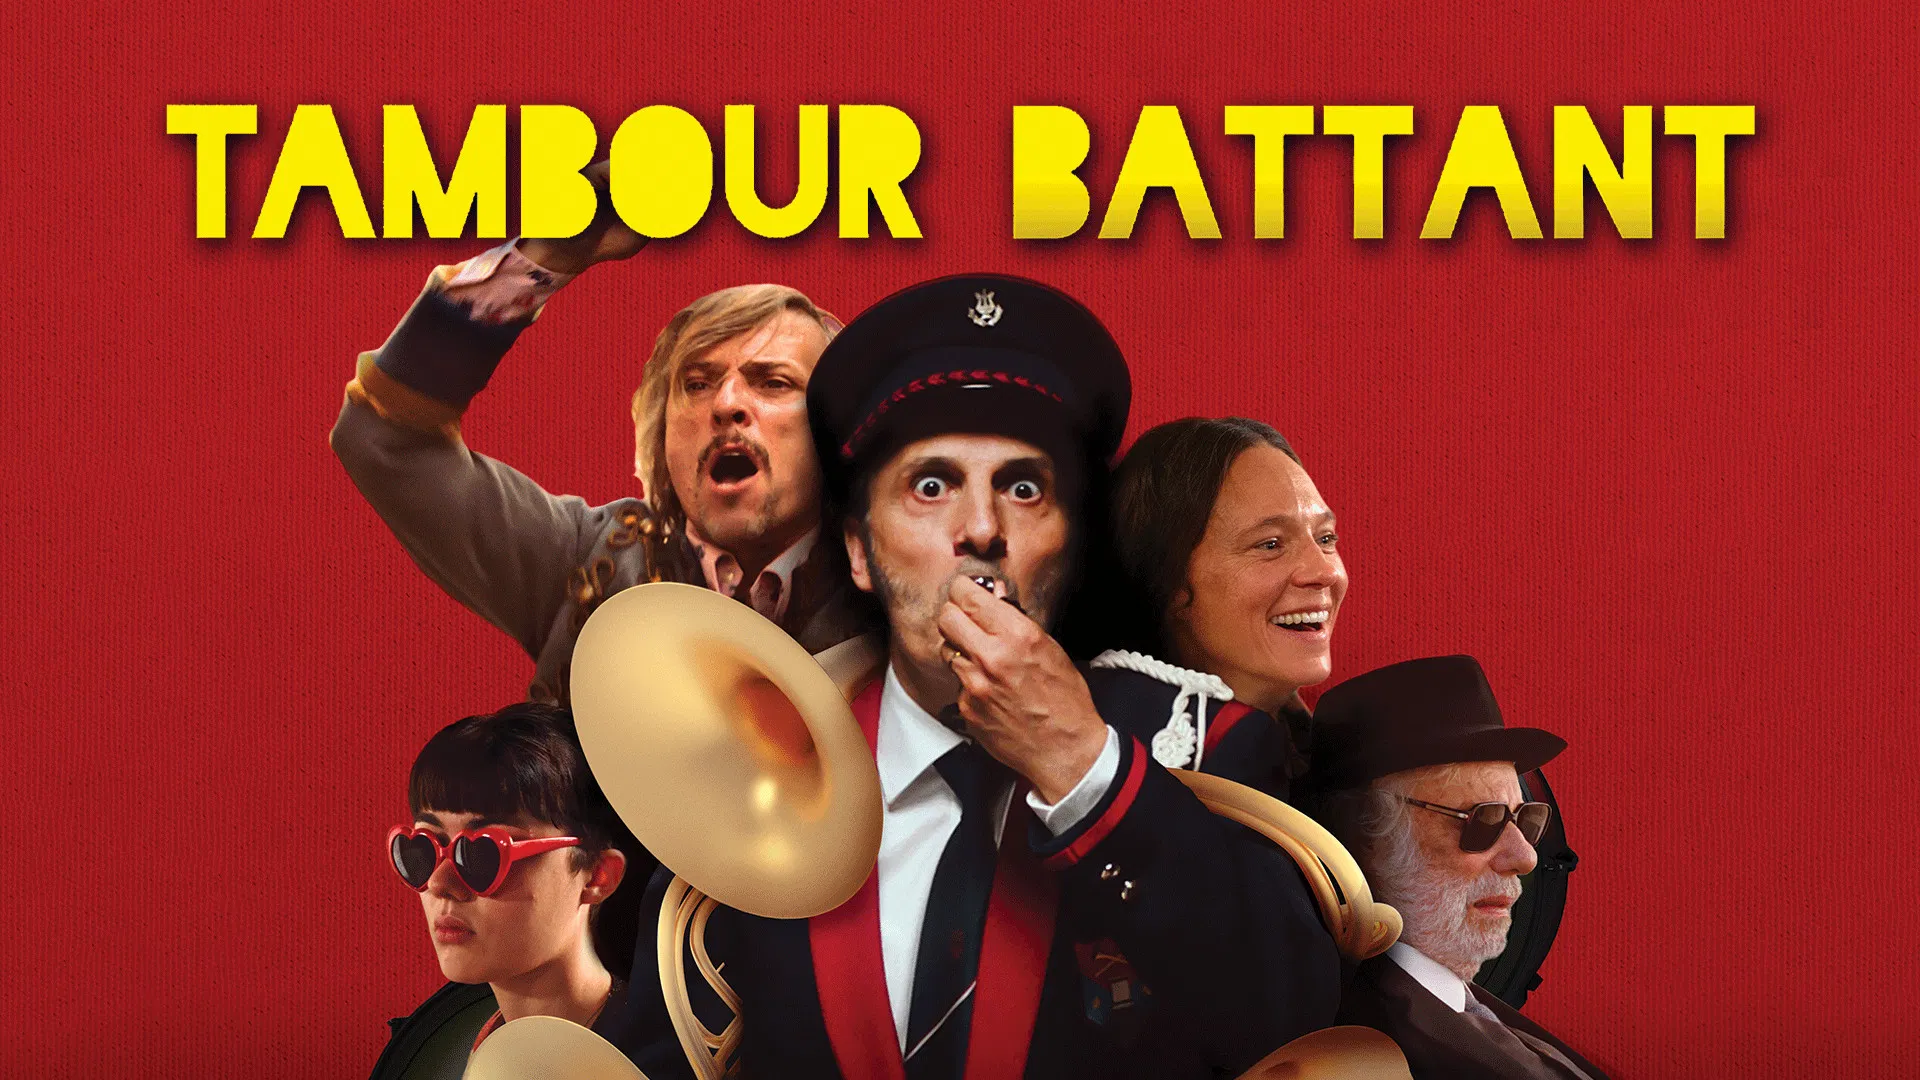 The band is all here in "Tambour Battant" / Photo courtesy of Point Prod.